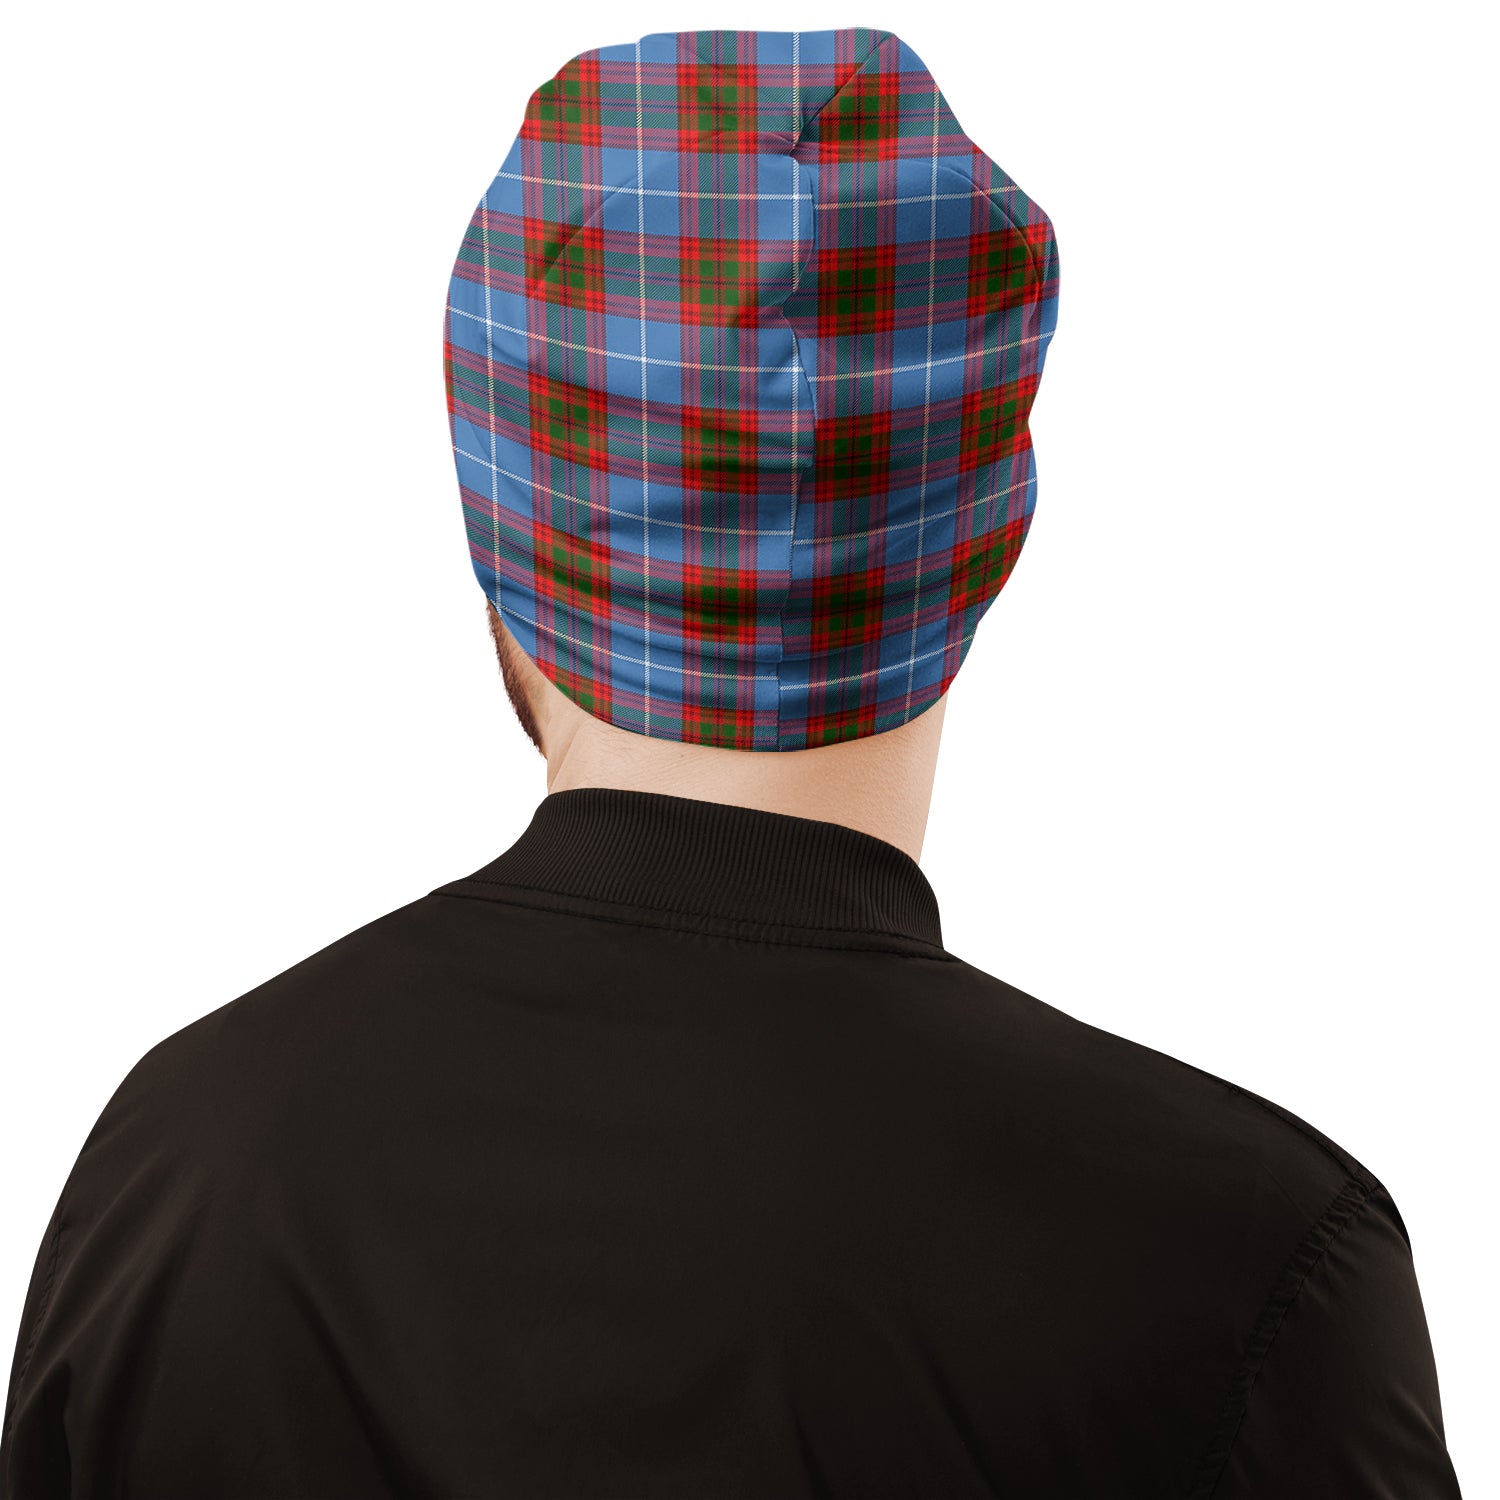 trotter-tartan-beanies-hat-with-family-crest